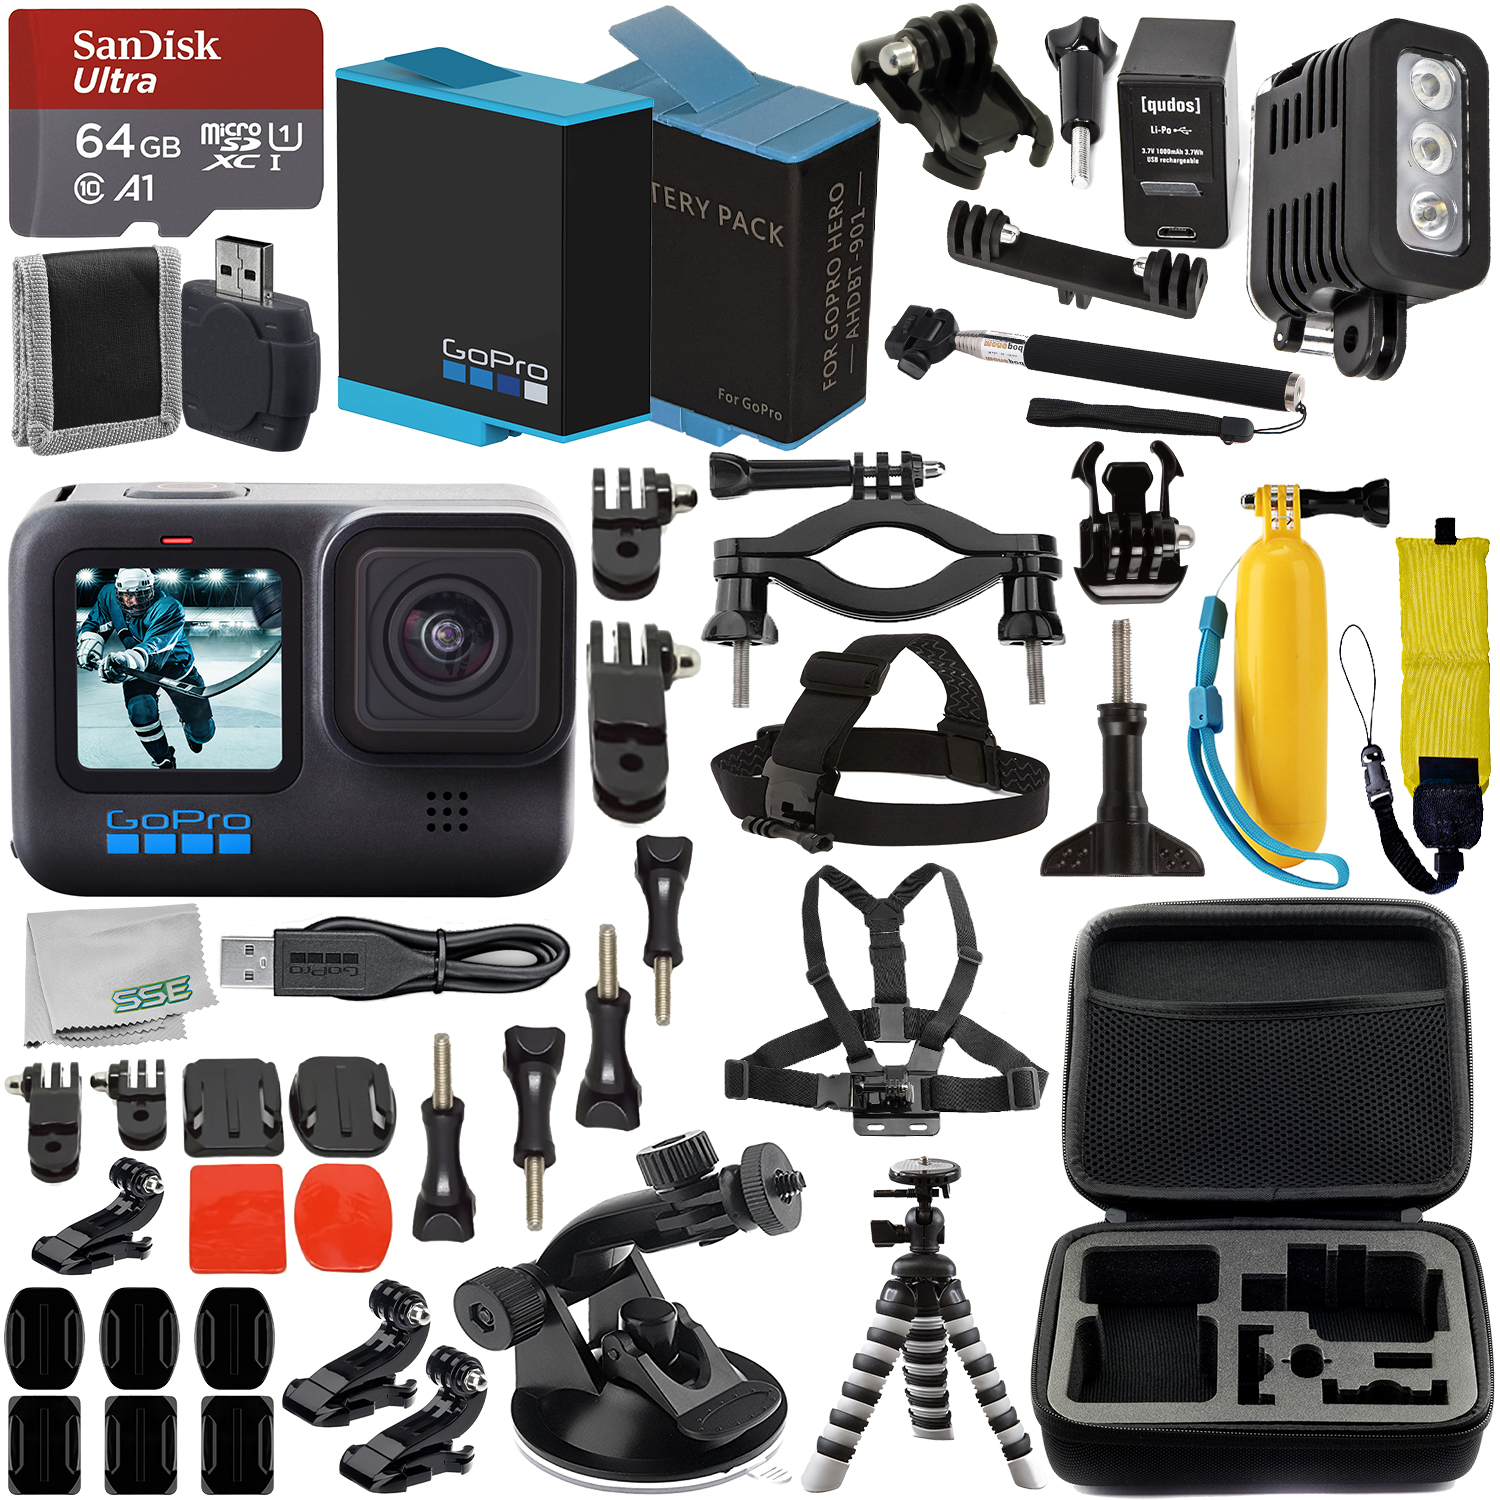 SSE GoPro HERO10 (Hero 10) Black with Premium Accessory Bundle: SanDisk Ultra 64GB microSD Memory Card, Replacement Battery, Underwater LED Light with Bracket, Water Resistant Protective Case & More - image 1 of 10